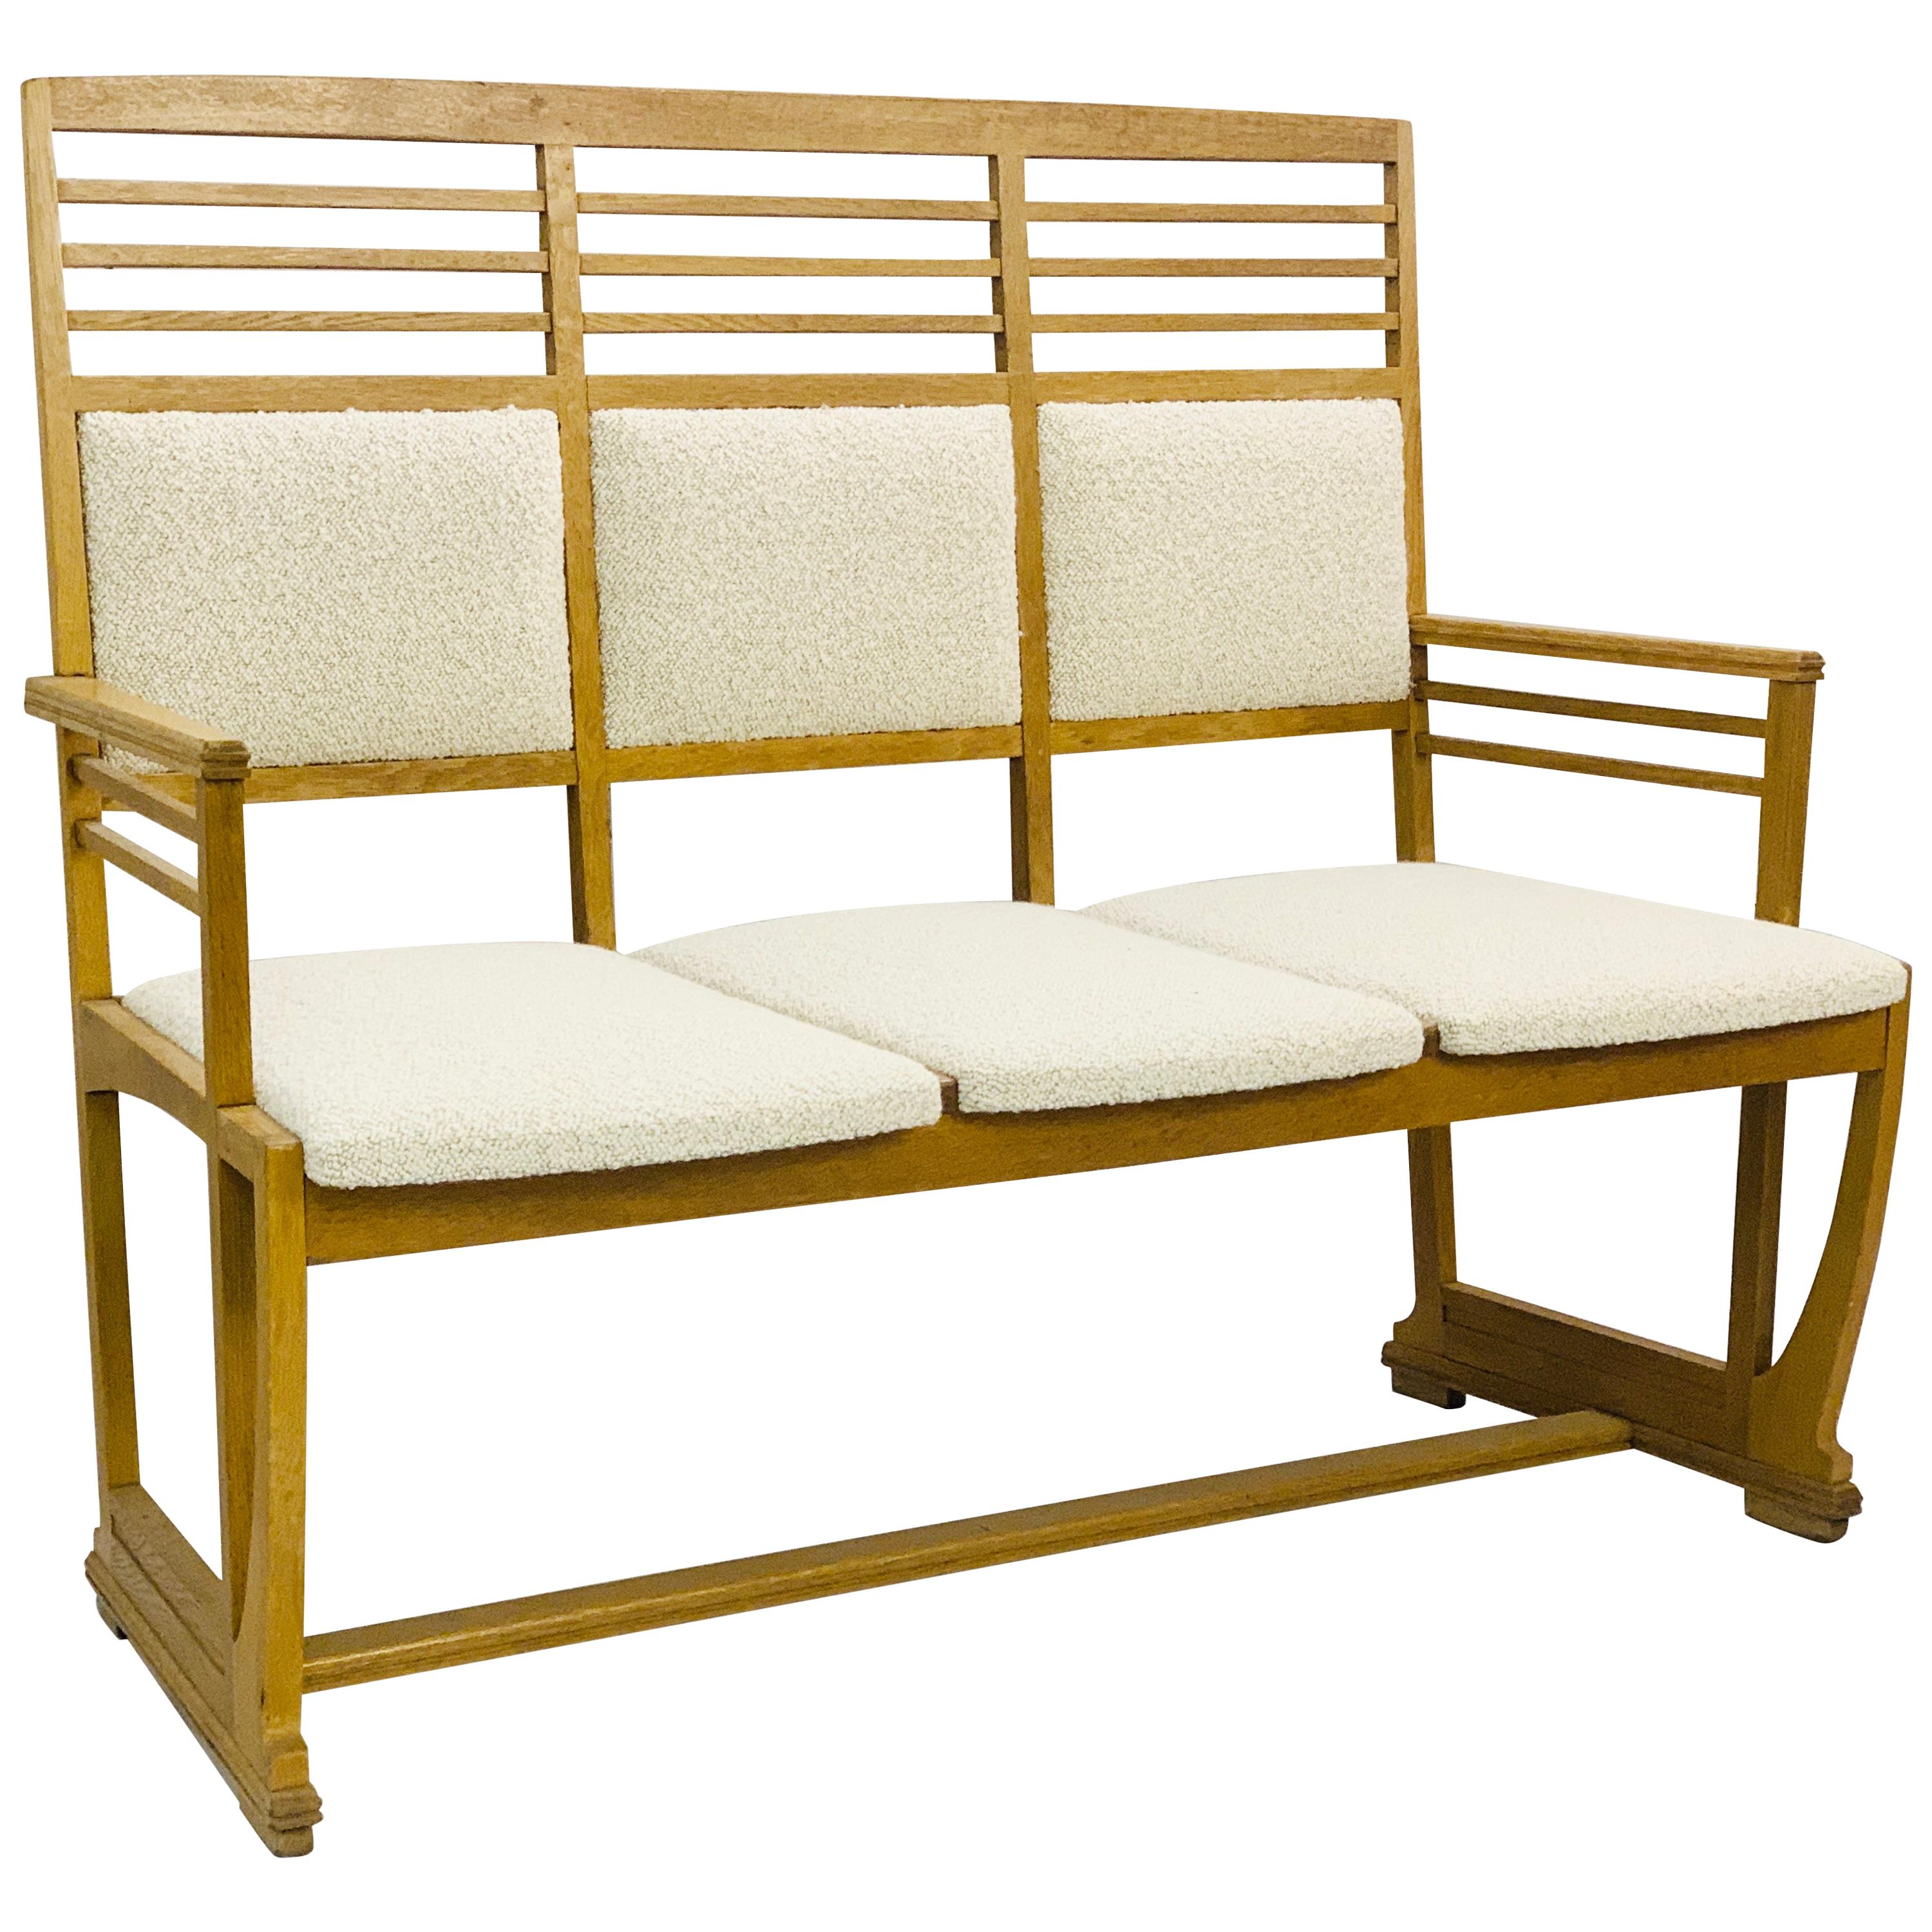 Bench Attributed to Gustave Serrurier-Bovy, New upholstery For Sale